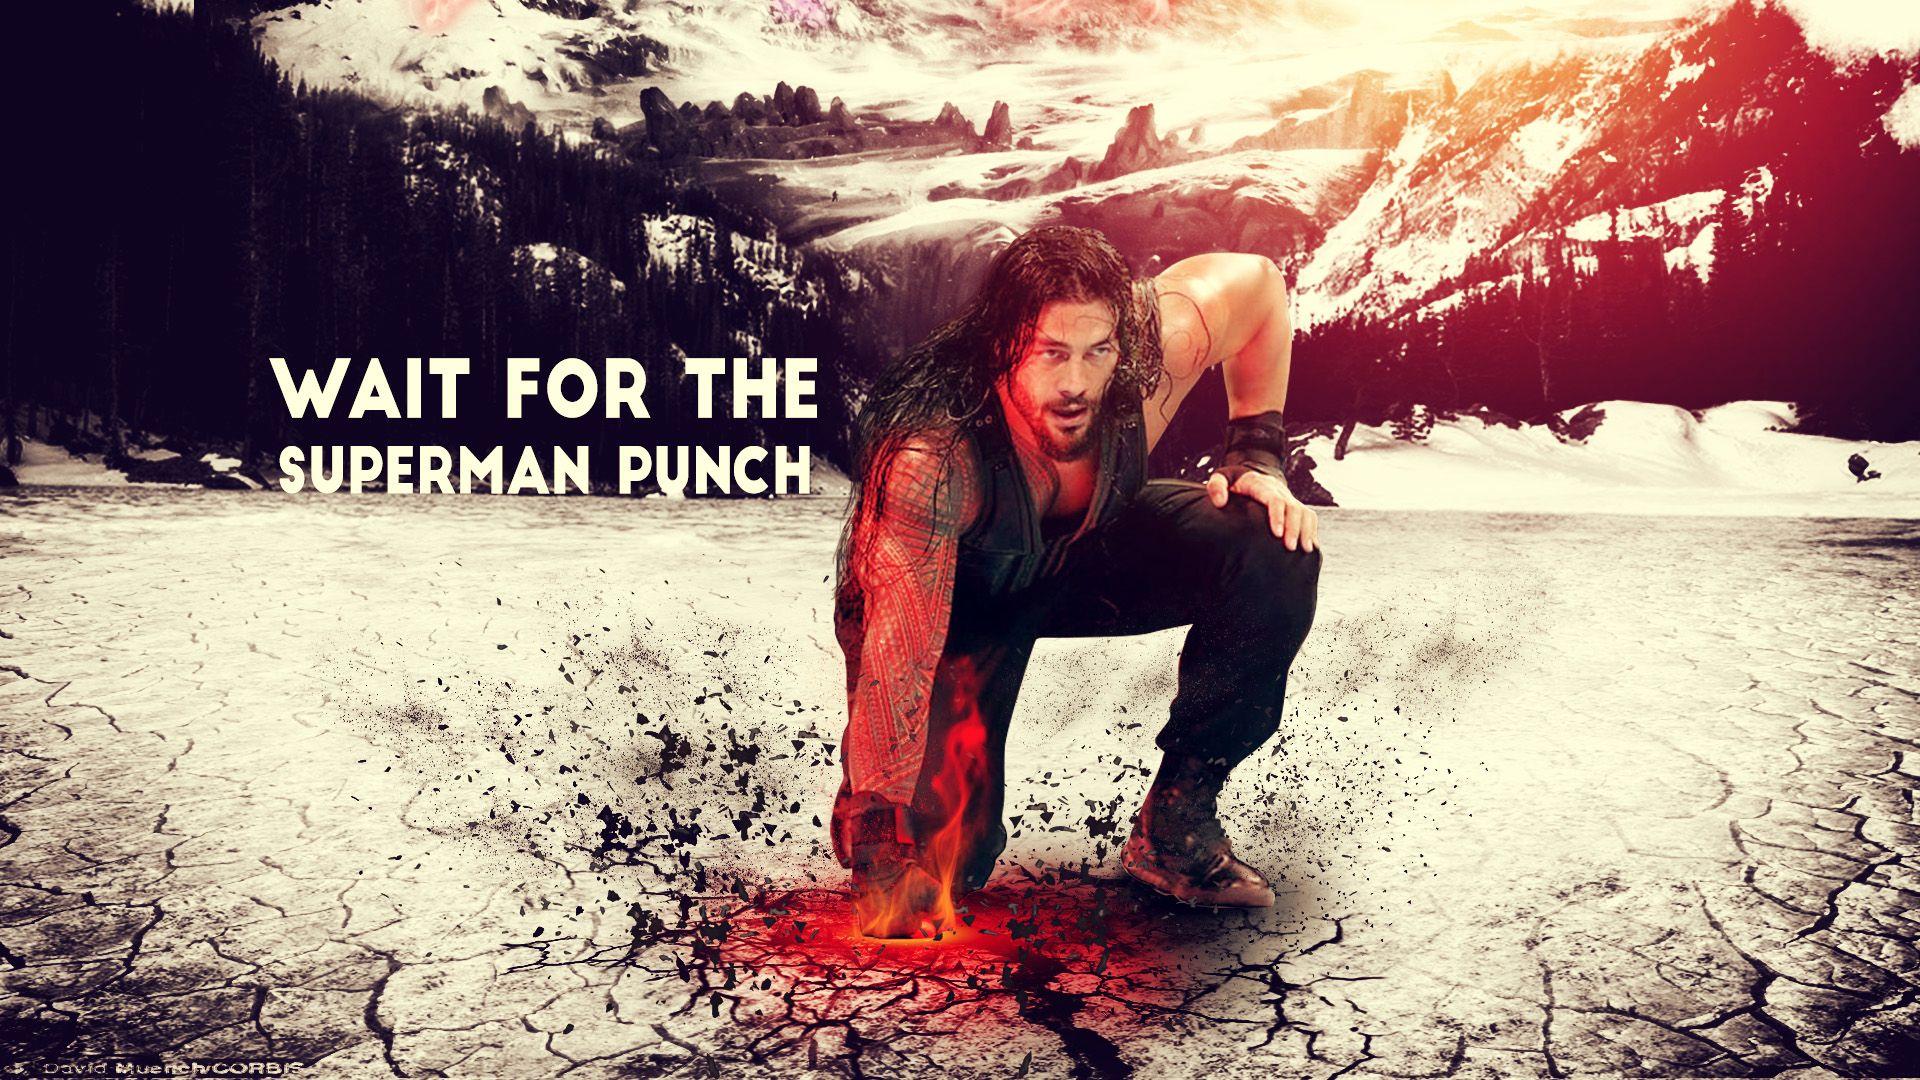 Roman Reigns Man Punch 2560x1024 Resolution Wallpaper, HD Celebrities 4K Wallpaper, Image, Photo and Background